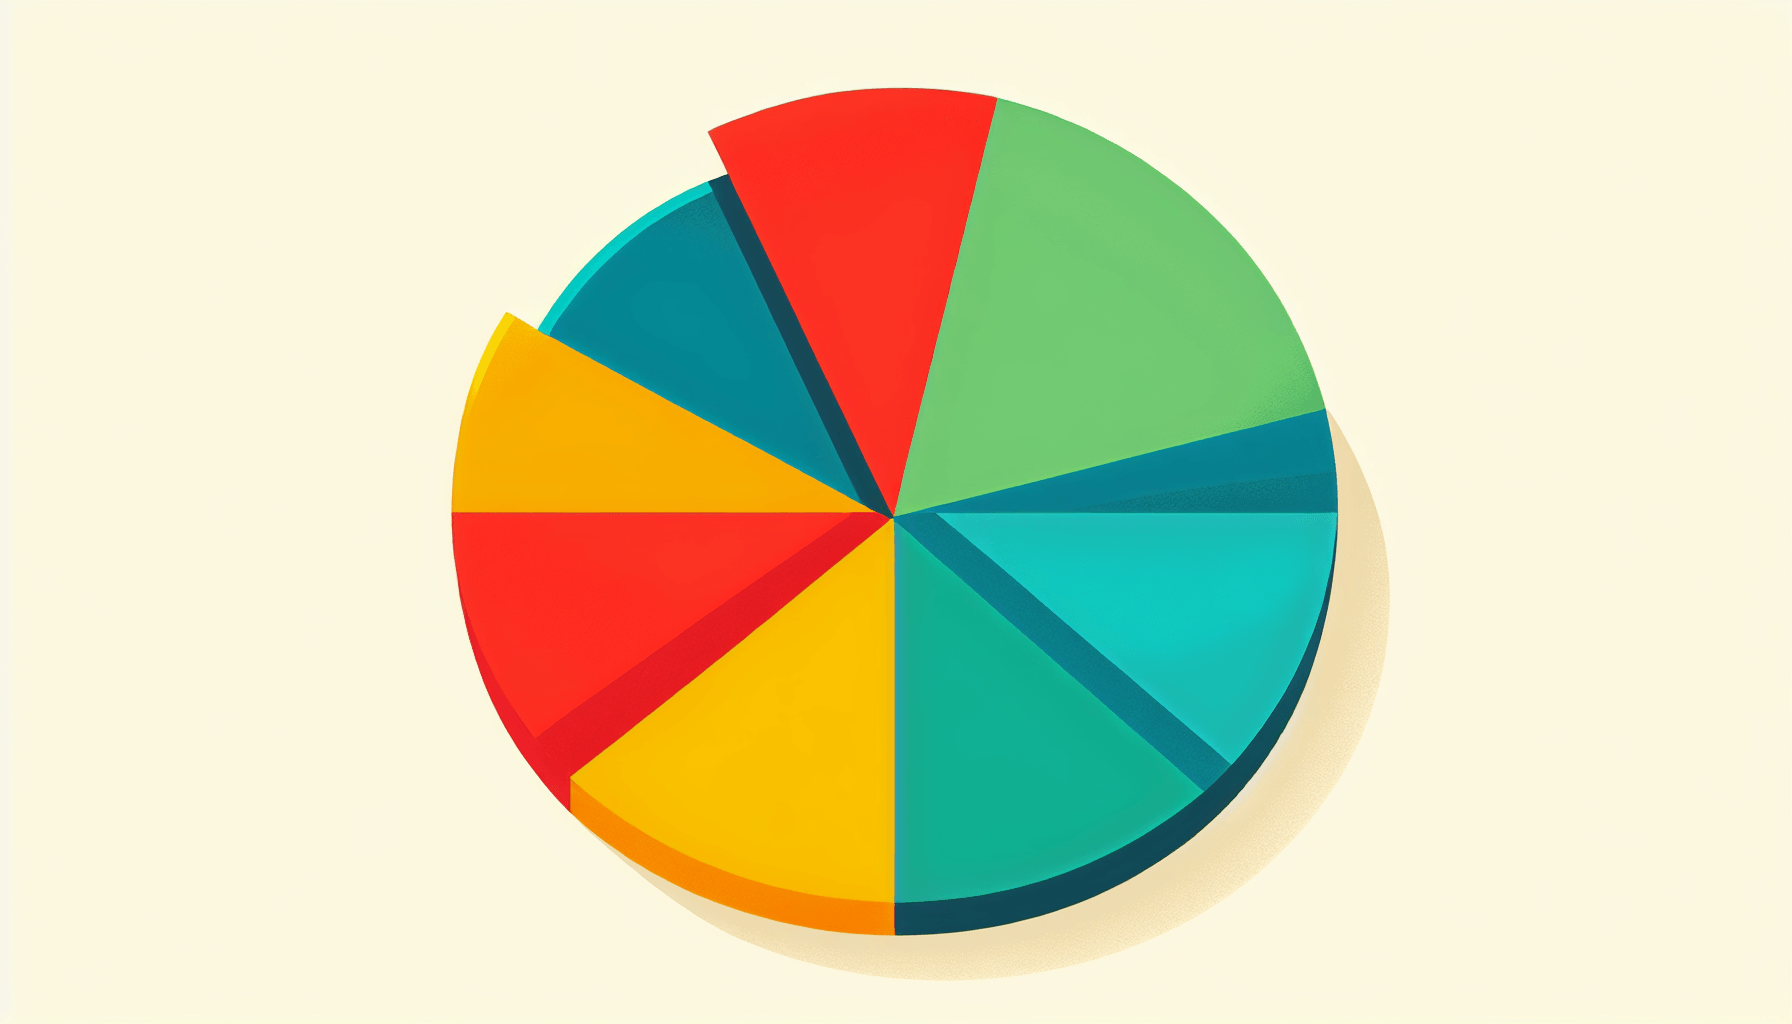 Pie chart in flat illustration style and white background, red #f47574, green #88c7a8, yellow #fcc44b, and blue #645bc8 colors.